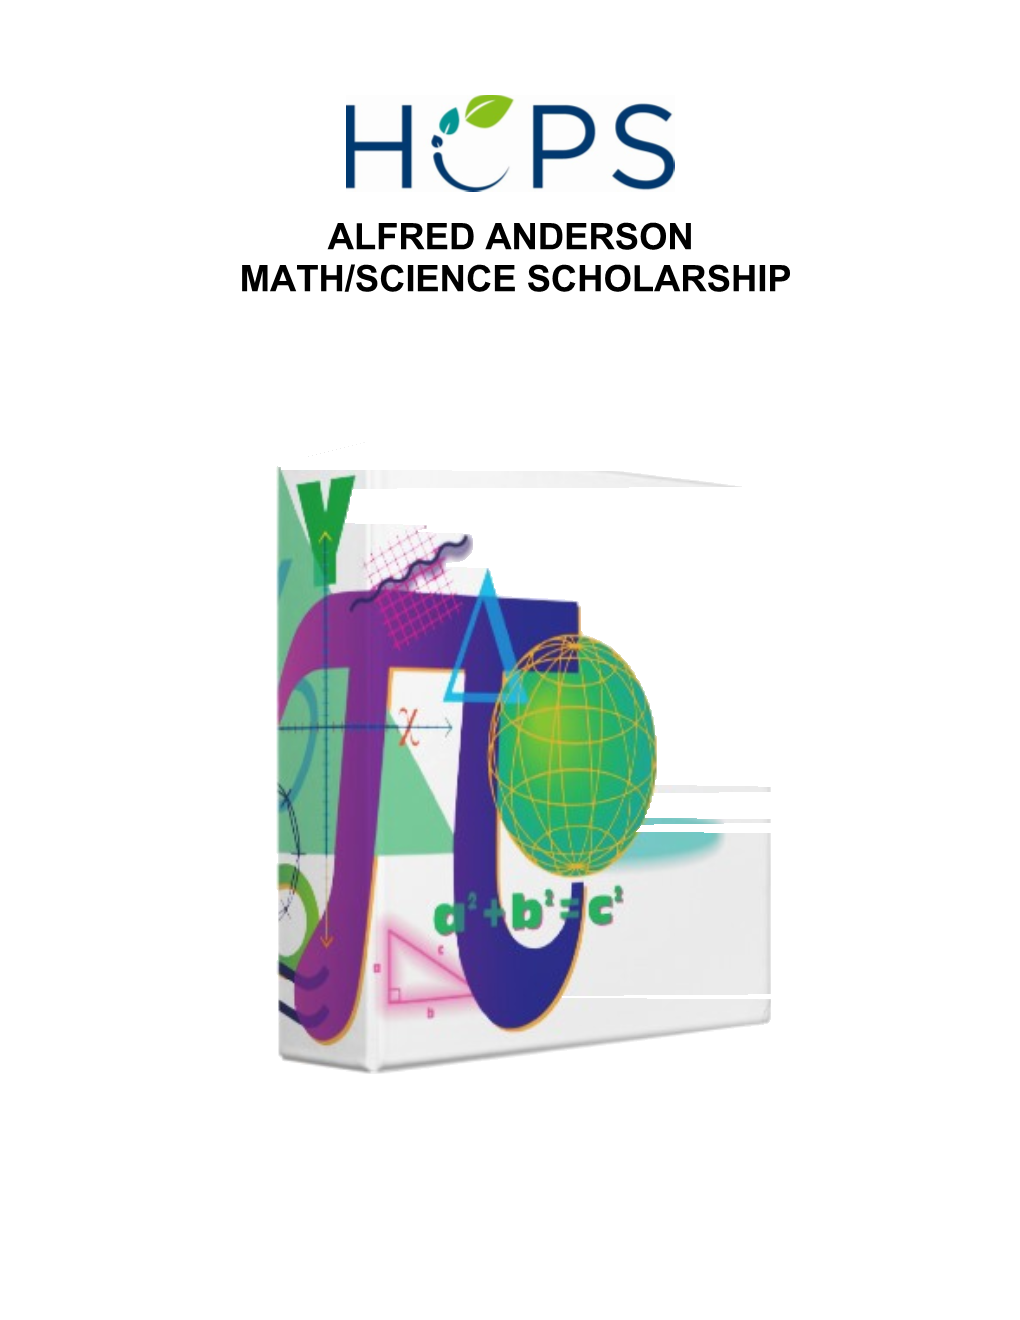 Alfred Anderson Mathematics/Science Scholarship